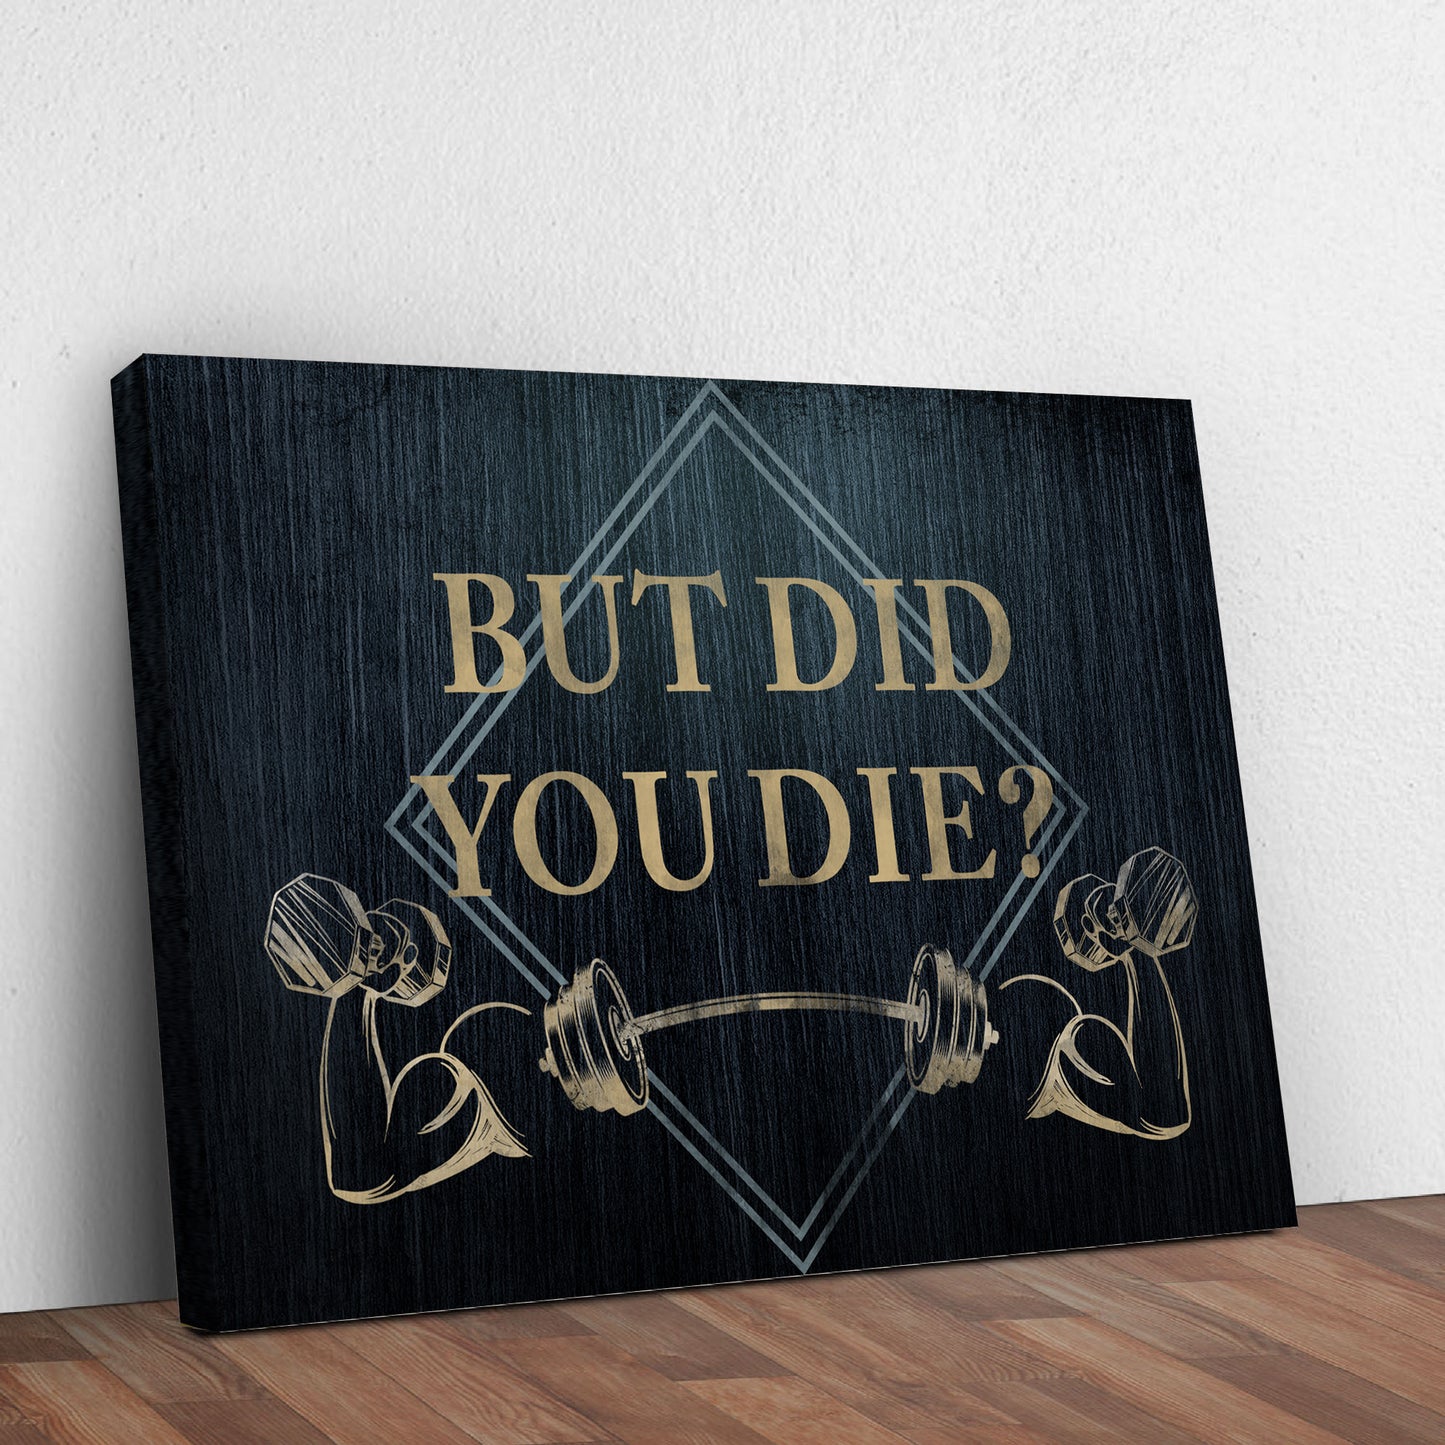 Did You Die? Gym Sign Style 2 - Image by Tailored Canvases